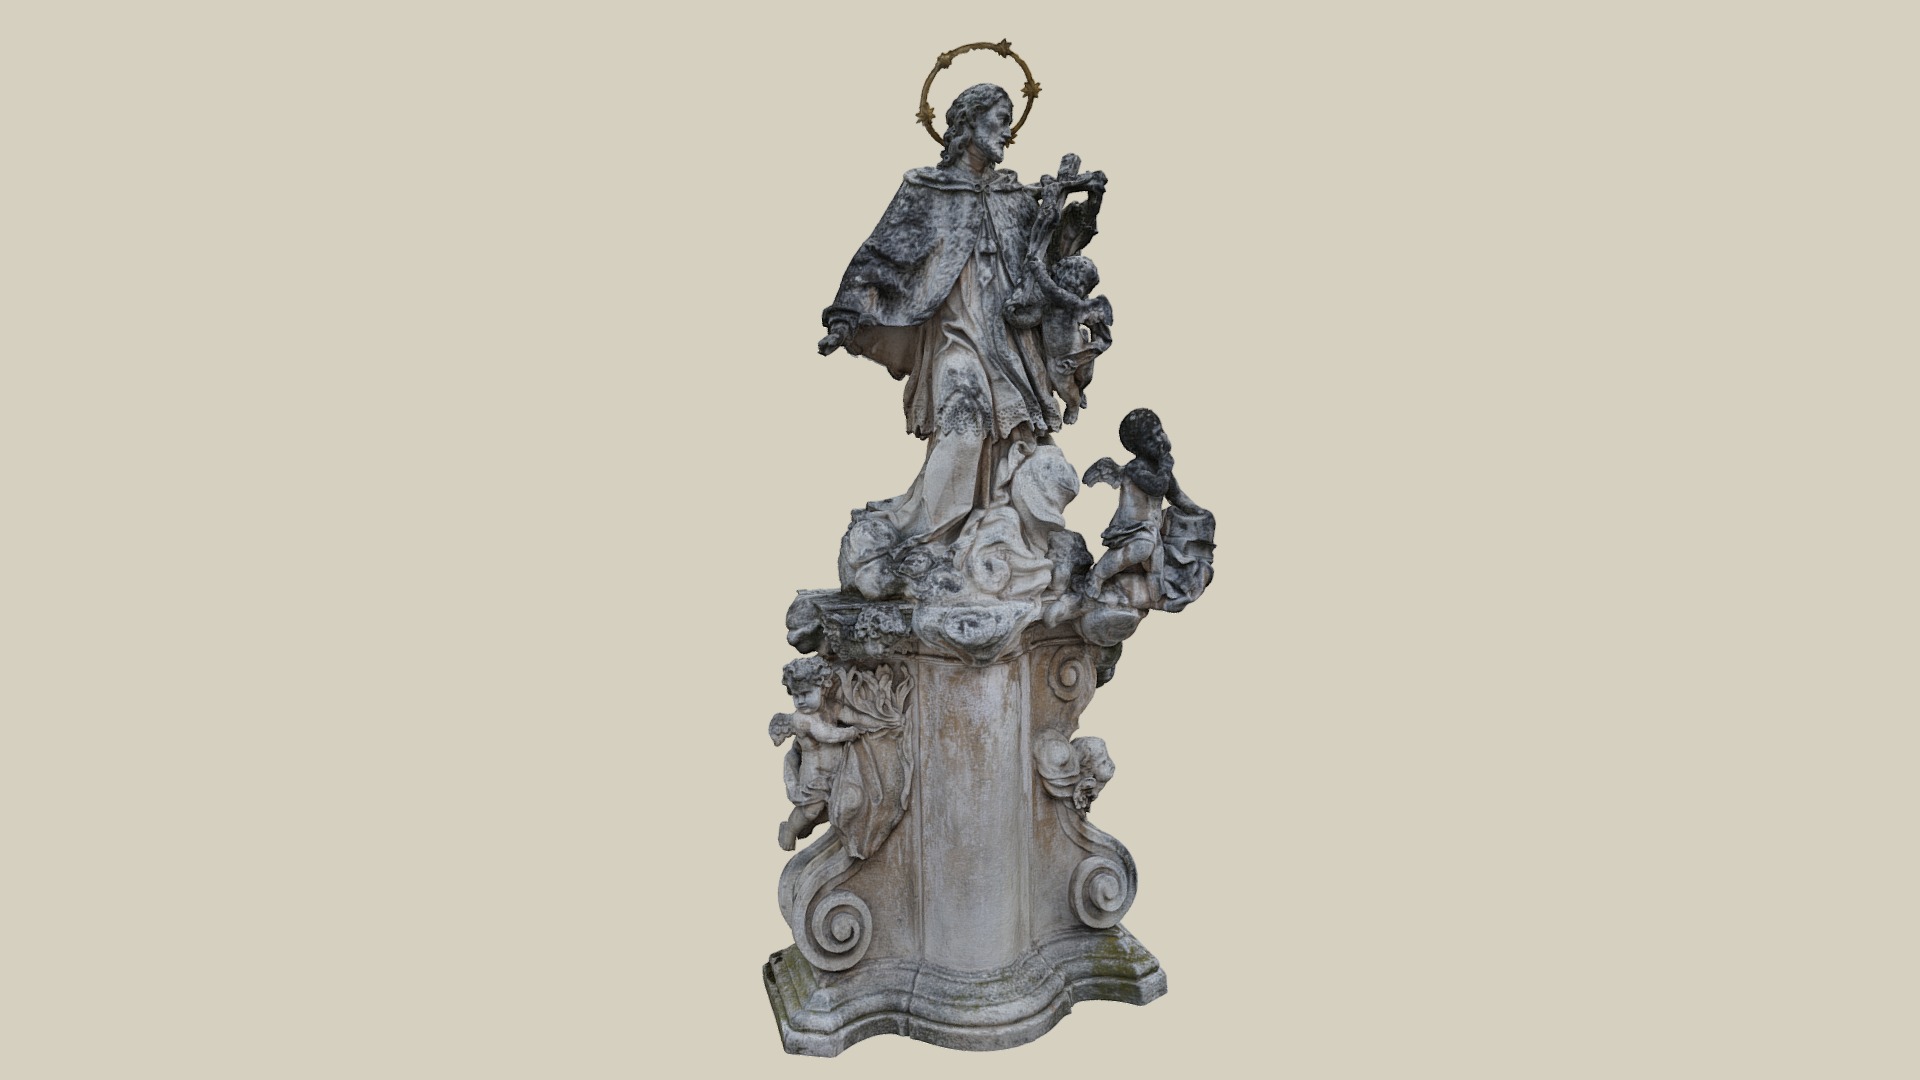 3D model Nepomuk - This is a 3D model of the Nepomuk. The 3D model is about a statue of a person holding a staff.